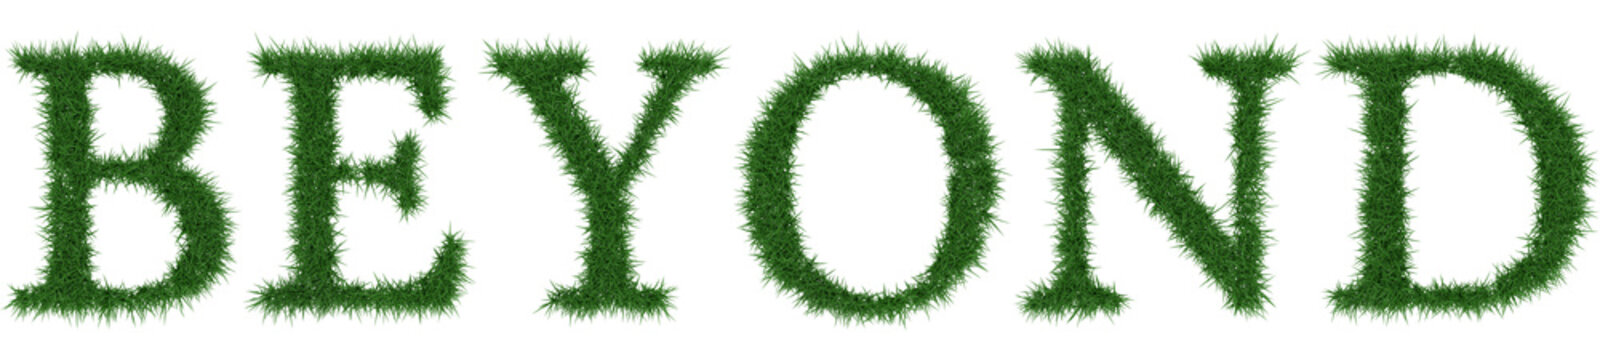 Beyond - 3D rendering fresh Grass letters isolated on whhite background.